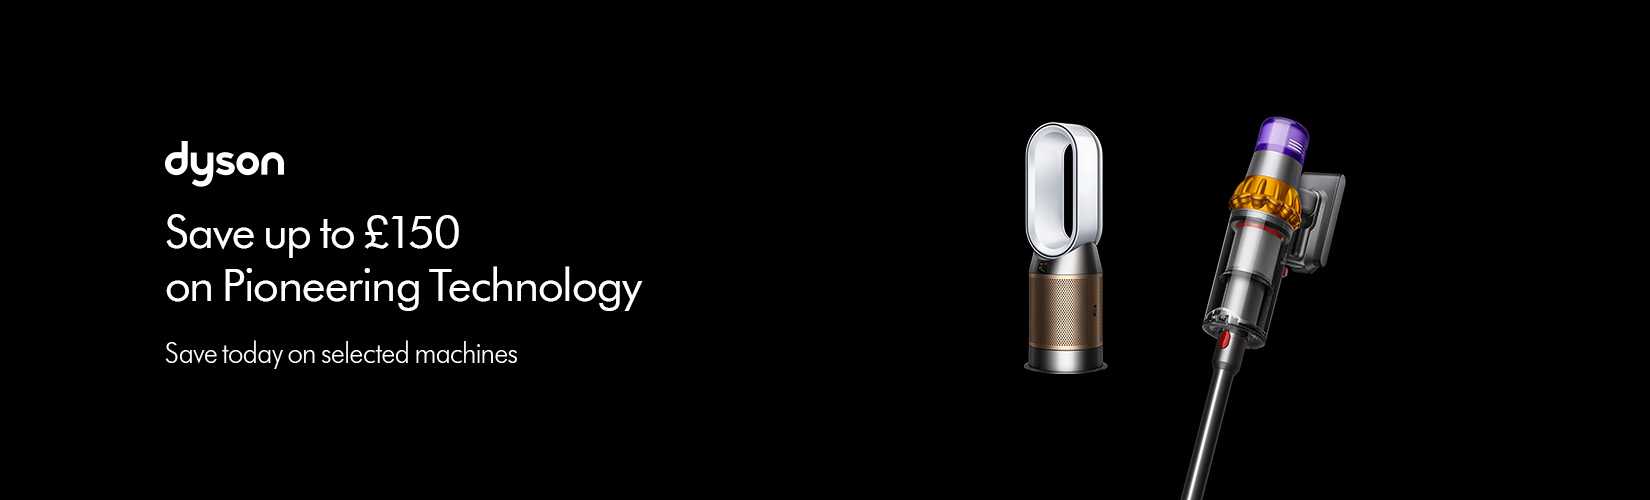 Dyson. Save up to £150 on Pioneering Technology.